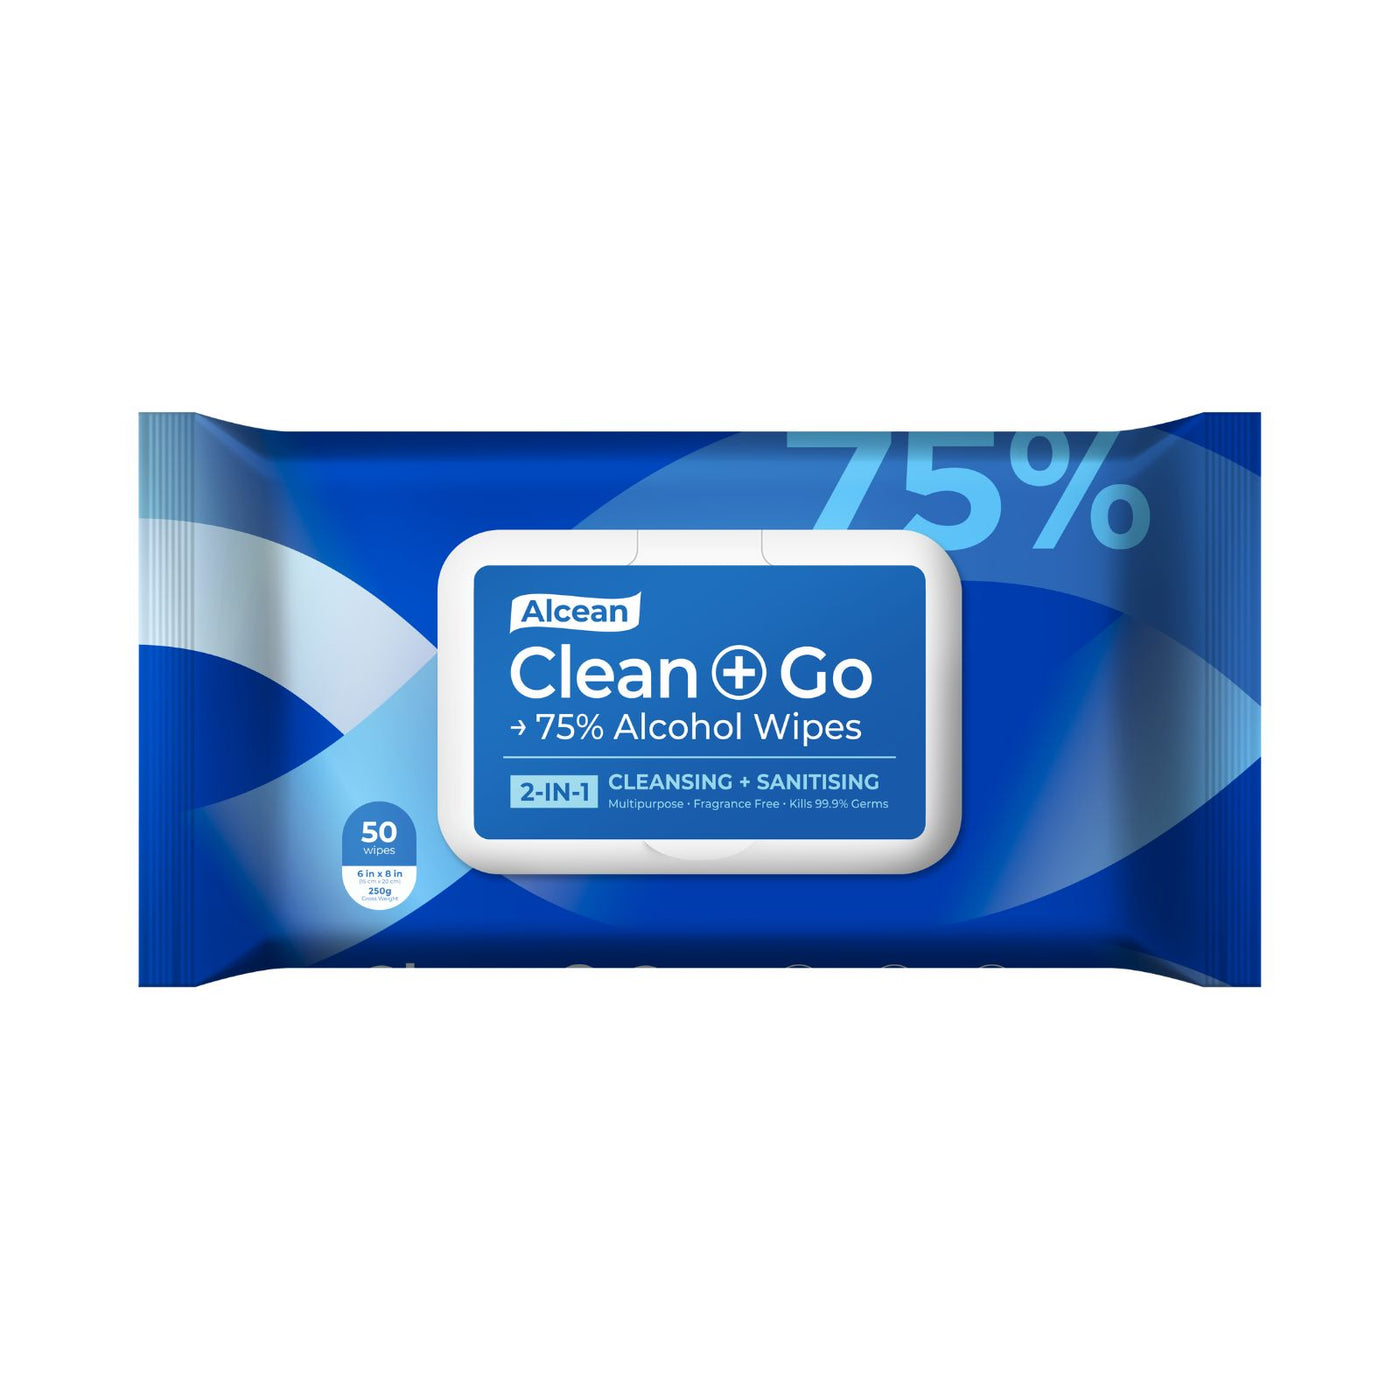 50 wipes (Bundle of 3) - 75% Alcohol Classic Wipes